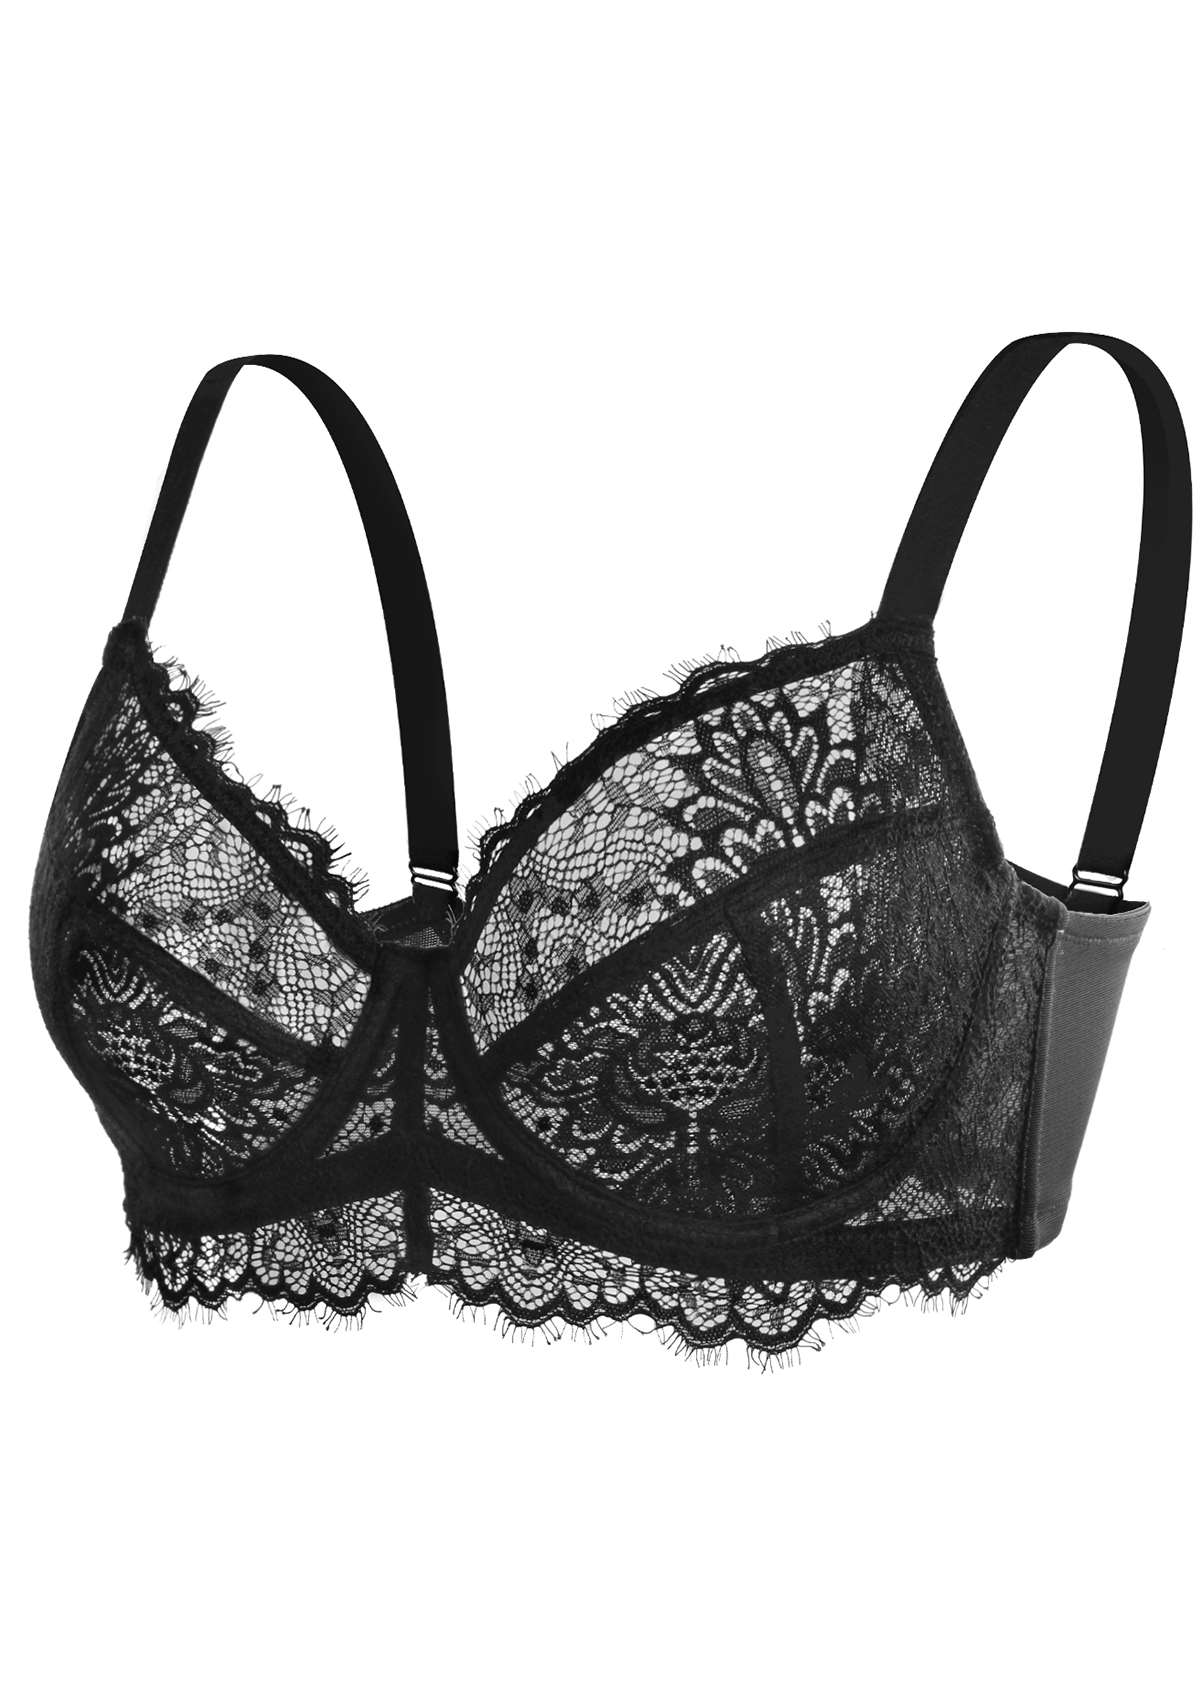 HSIA Sunflower Matching Bra And Underwear: Back And Side Smoothing Bra - Black / 40 / B